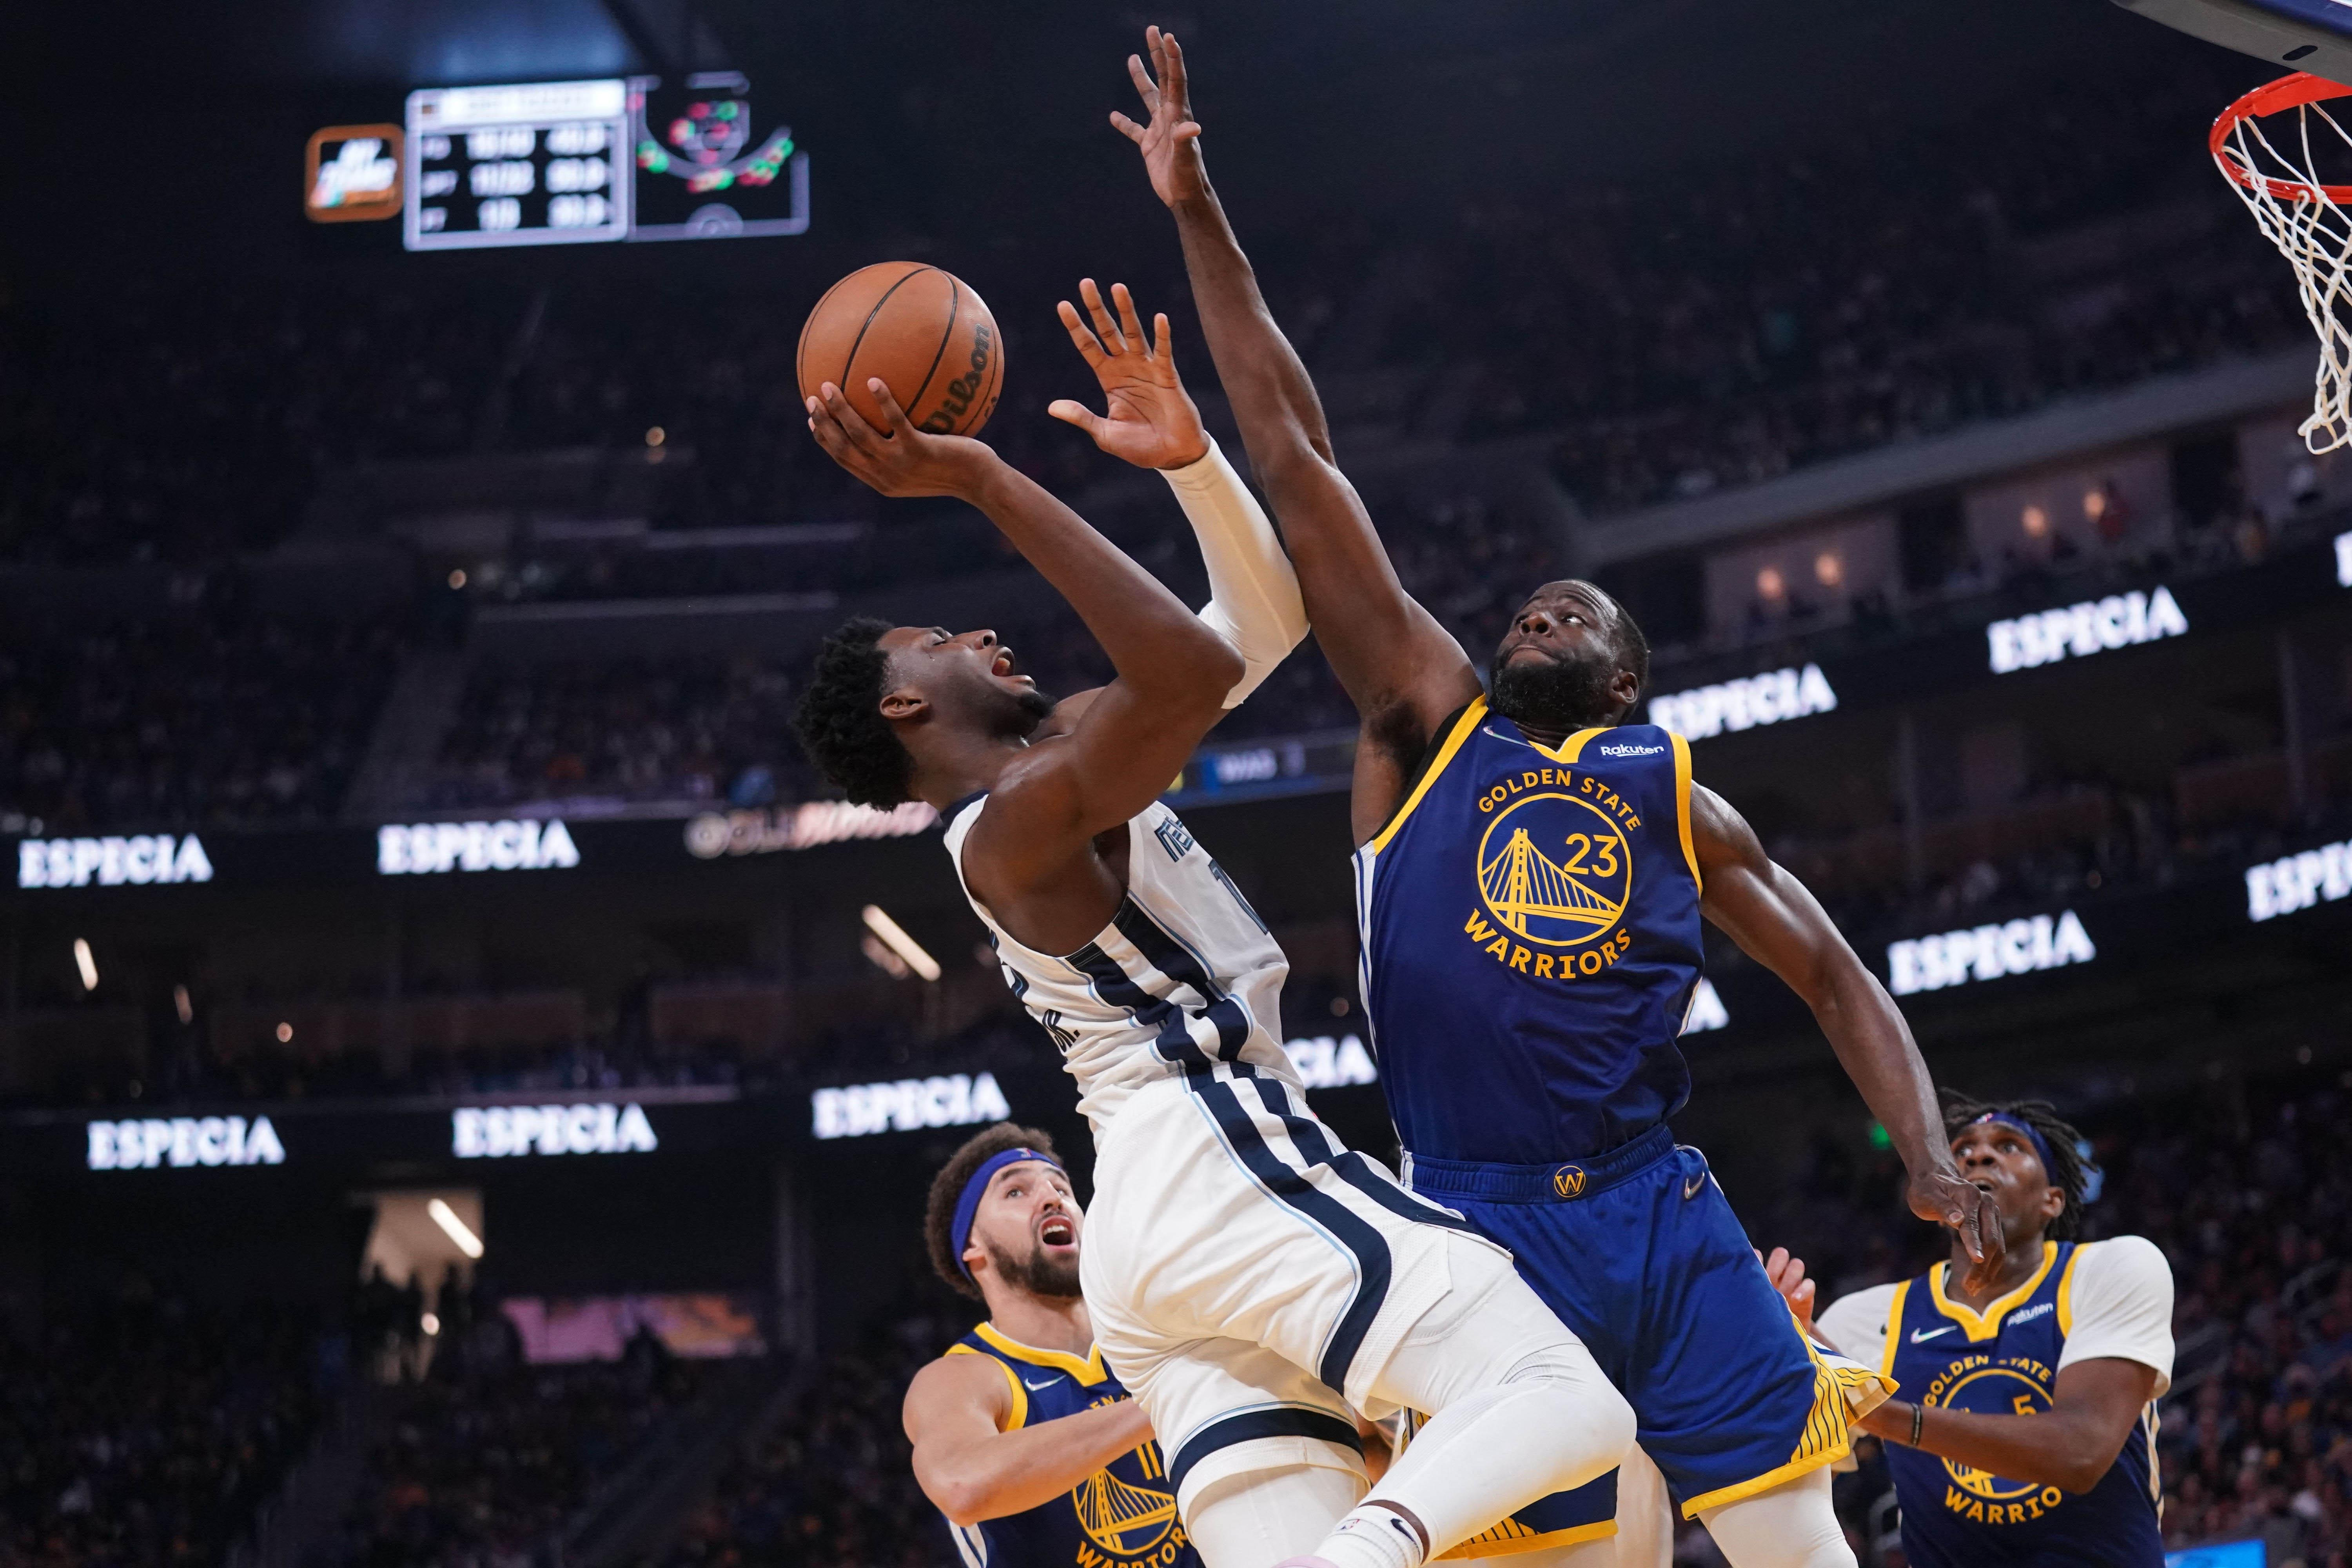 Warriors pull away late, close out Grizzlies in Game 6 GMA News Online